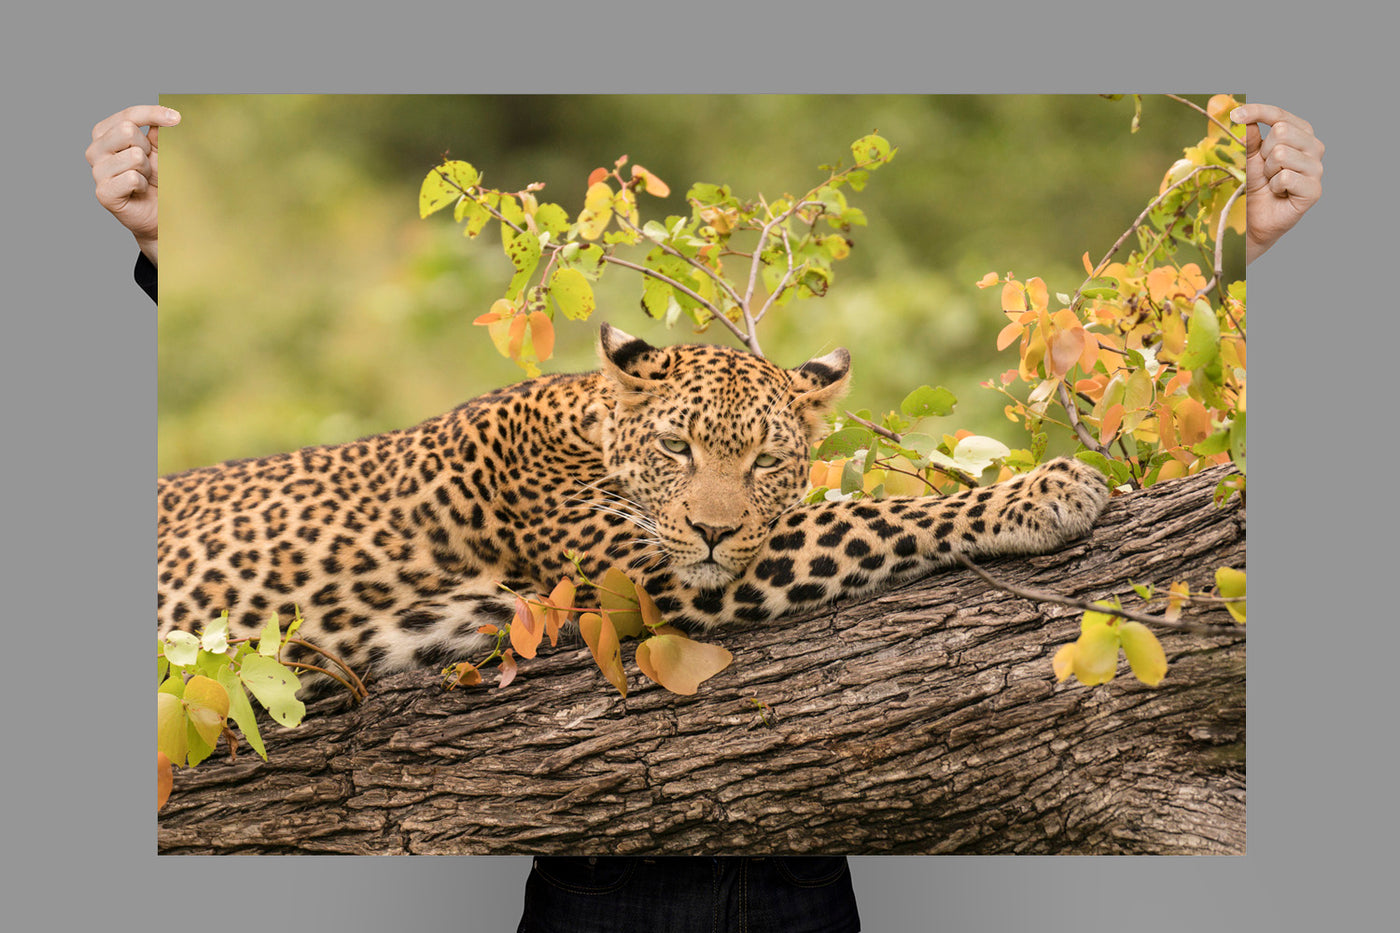 The Leopard | Africa – Wildlife Photography